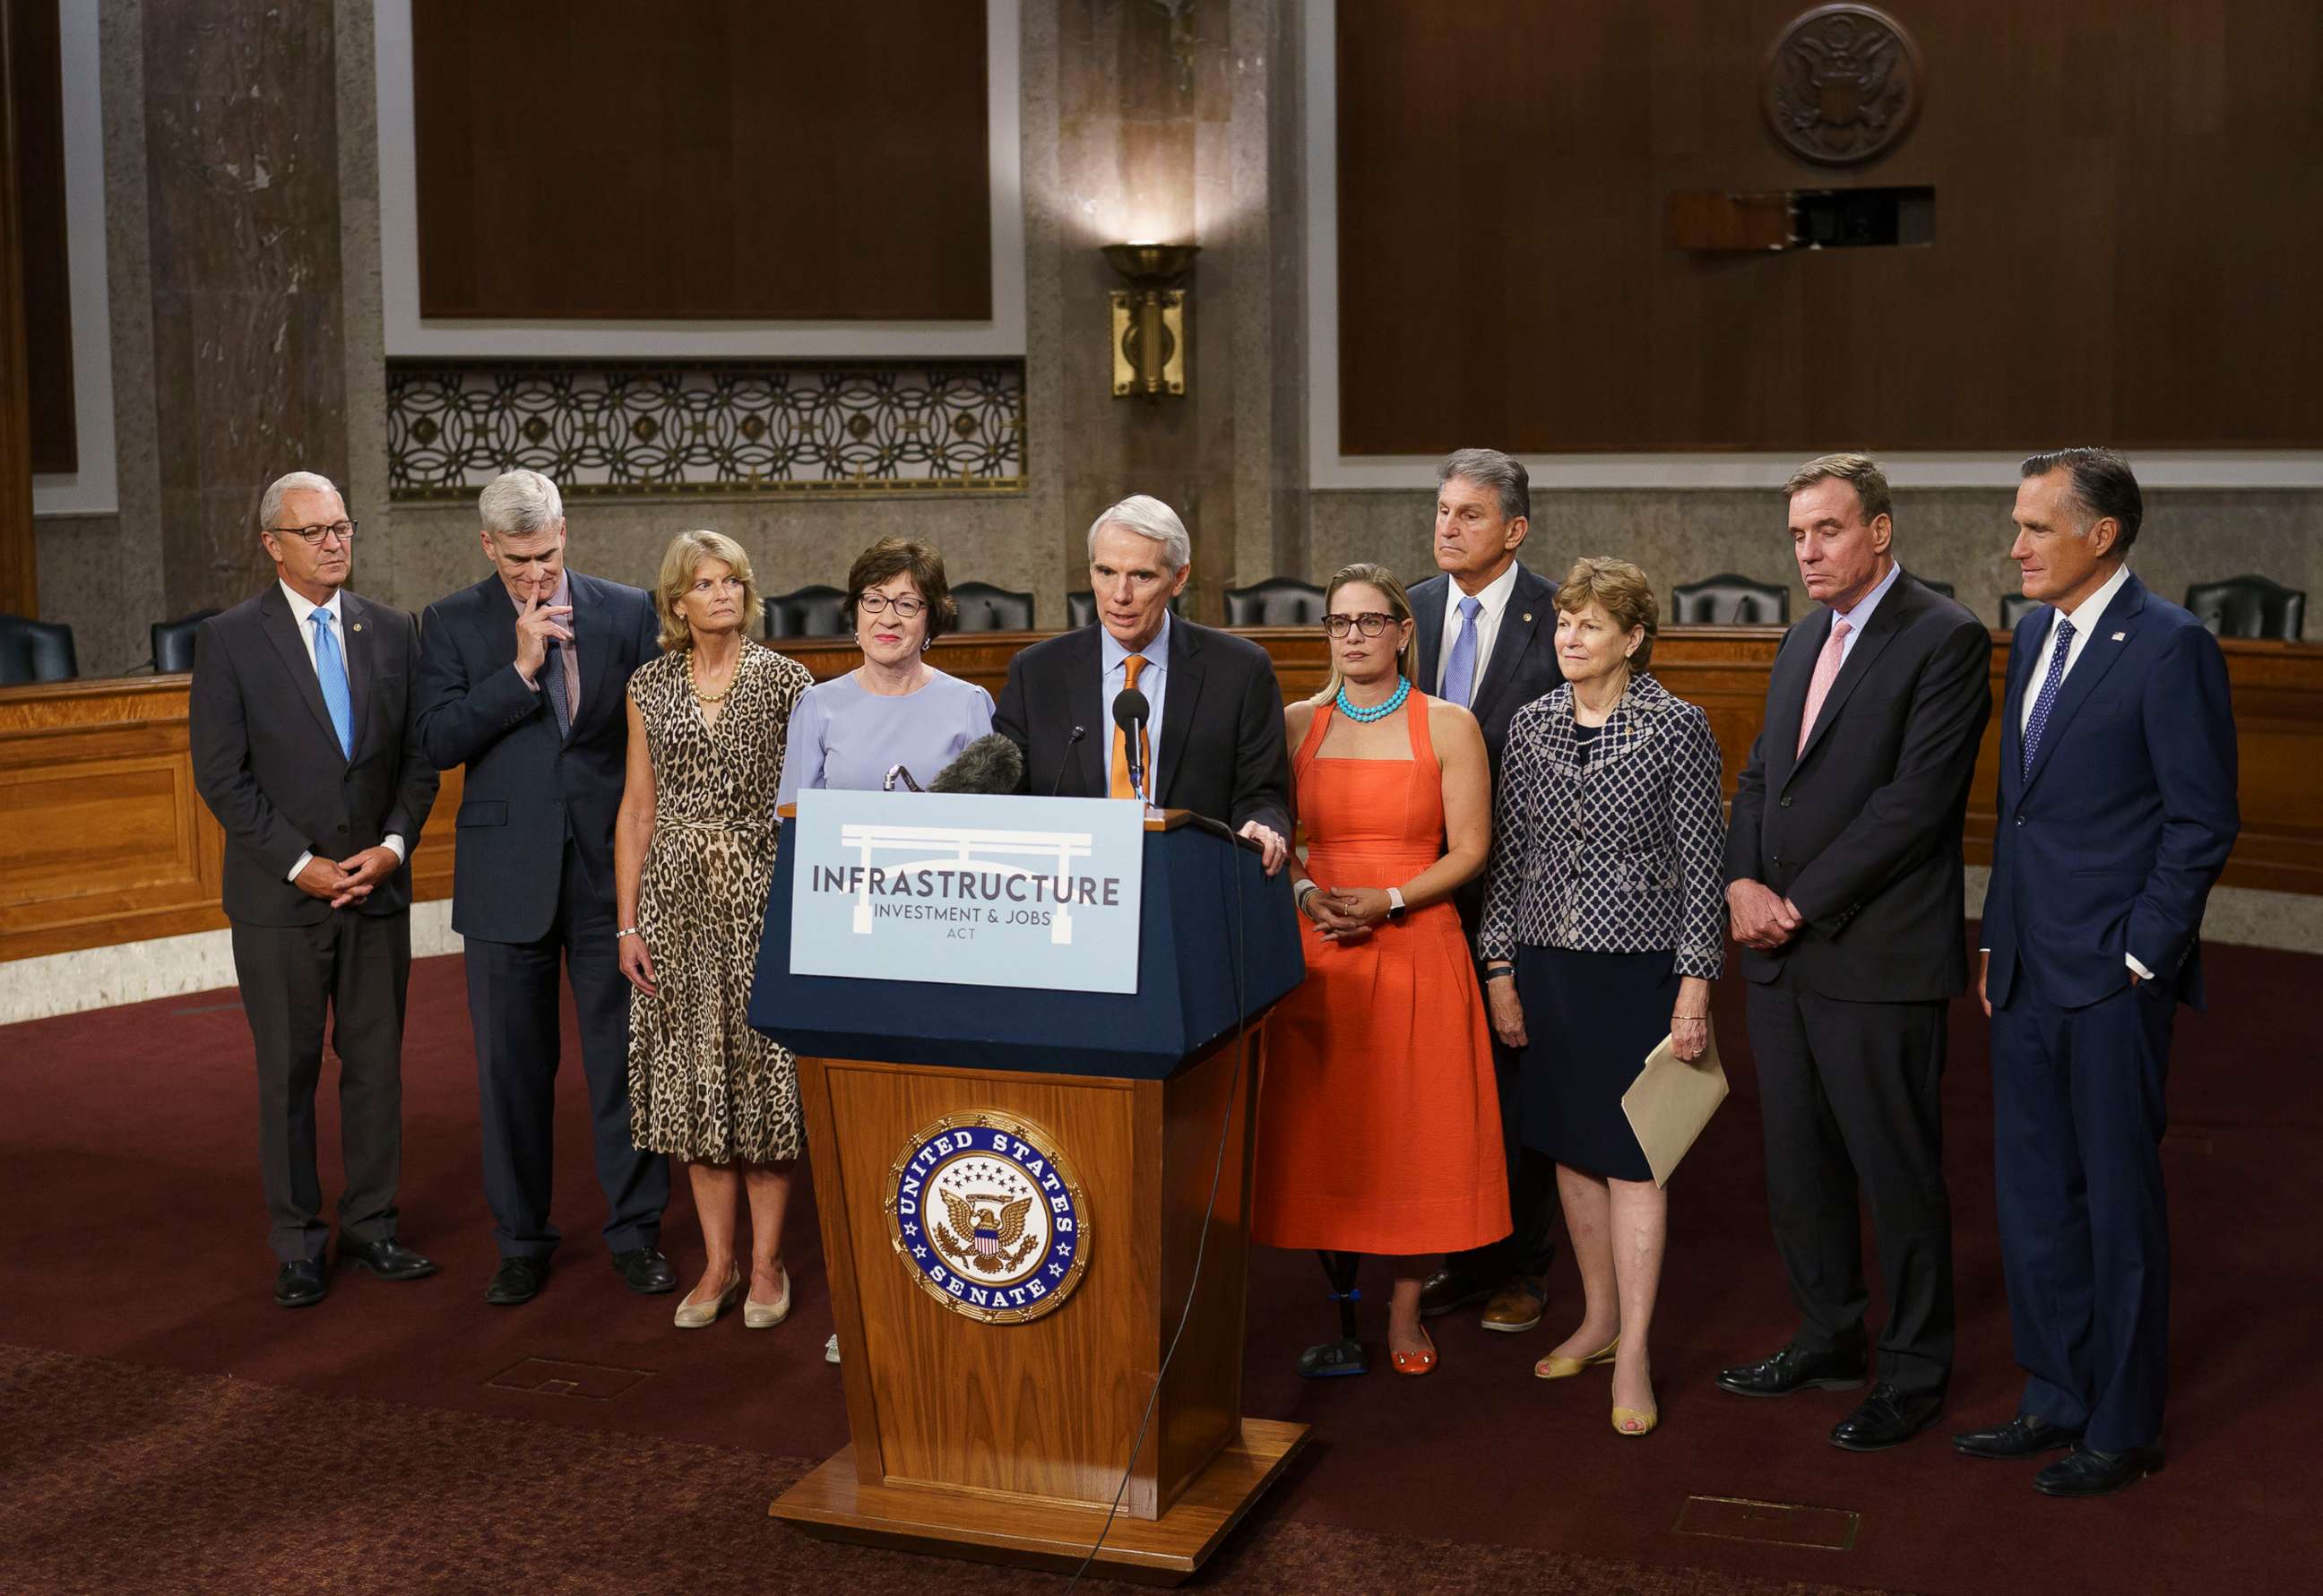 PHOTO: The bipartisan group of Senate negotiators speak to reporters just after a vote to start work on a nearly $1 trillion bipartisan infrastructure package, at the Capitol, July 28, 2021.